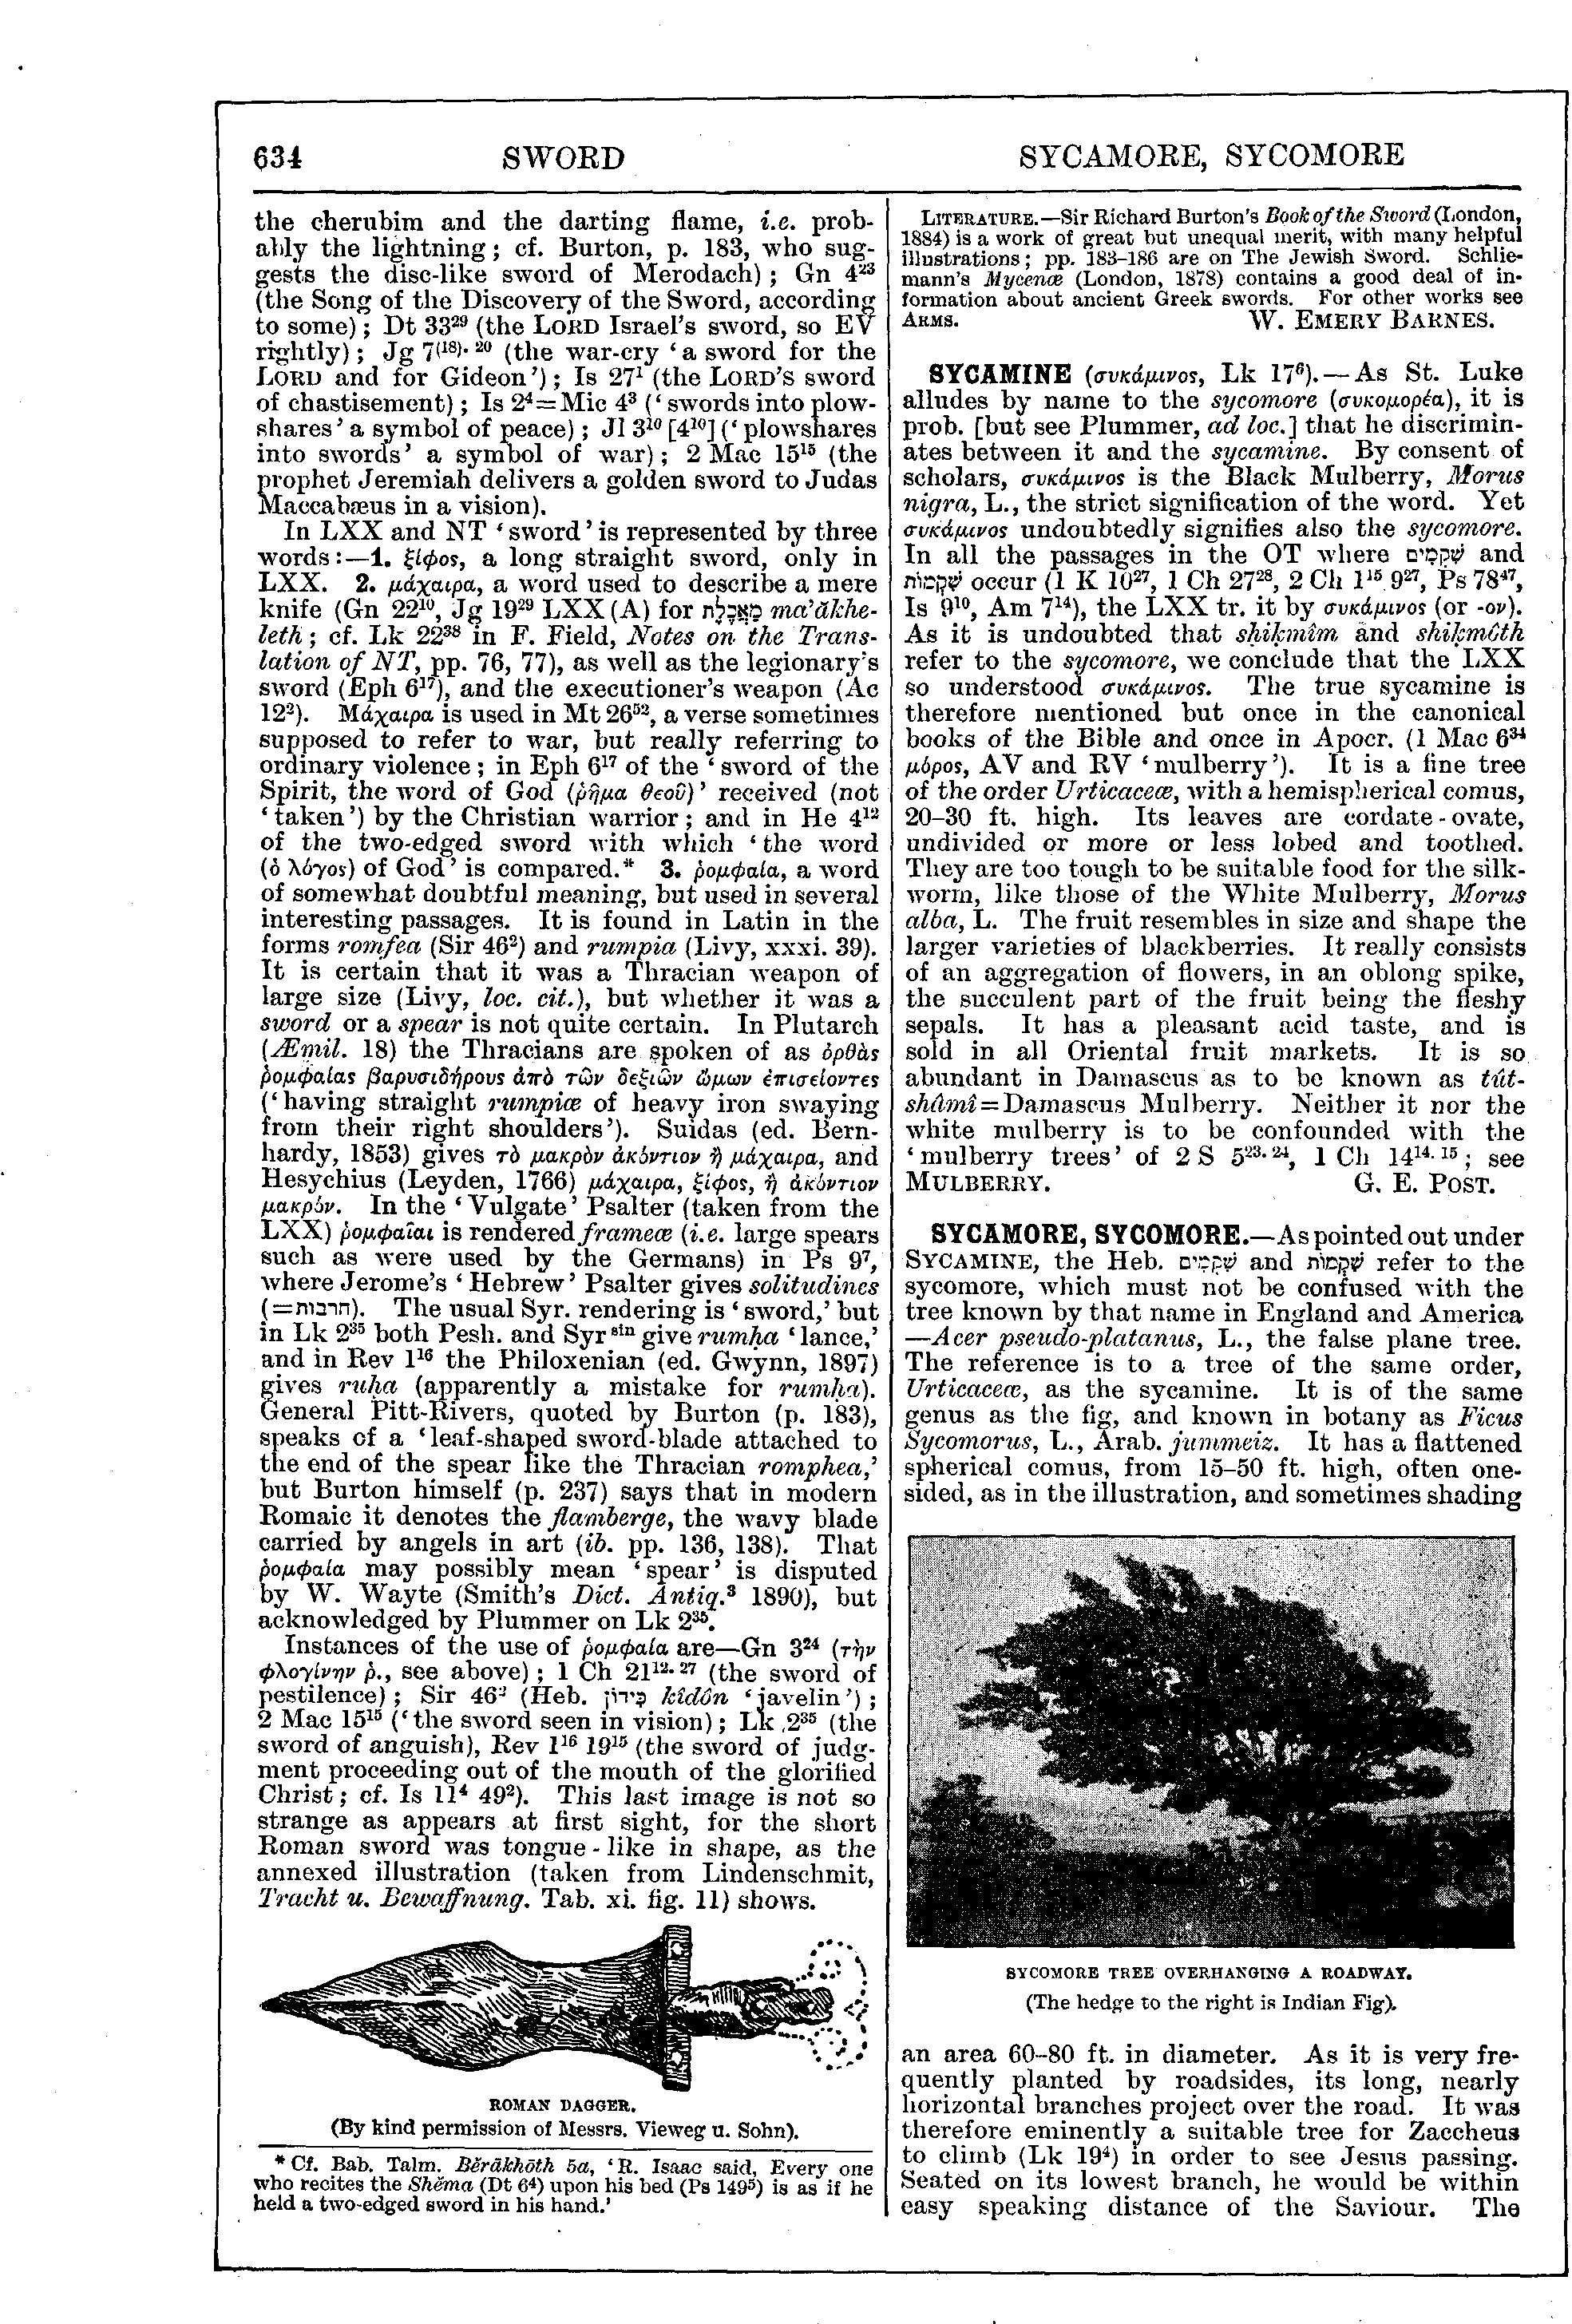 Image of page 634